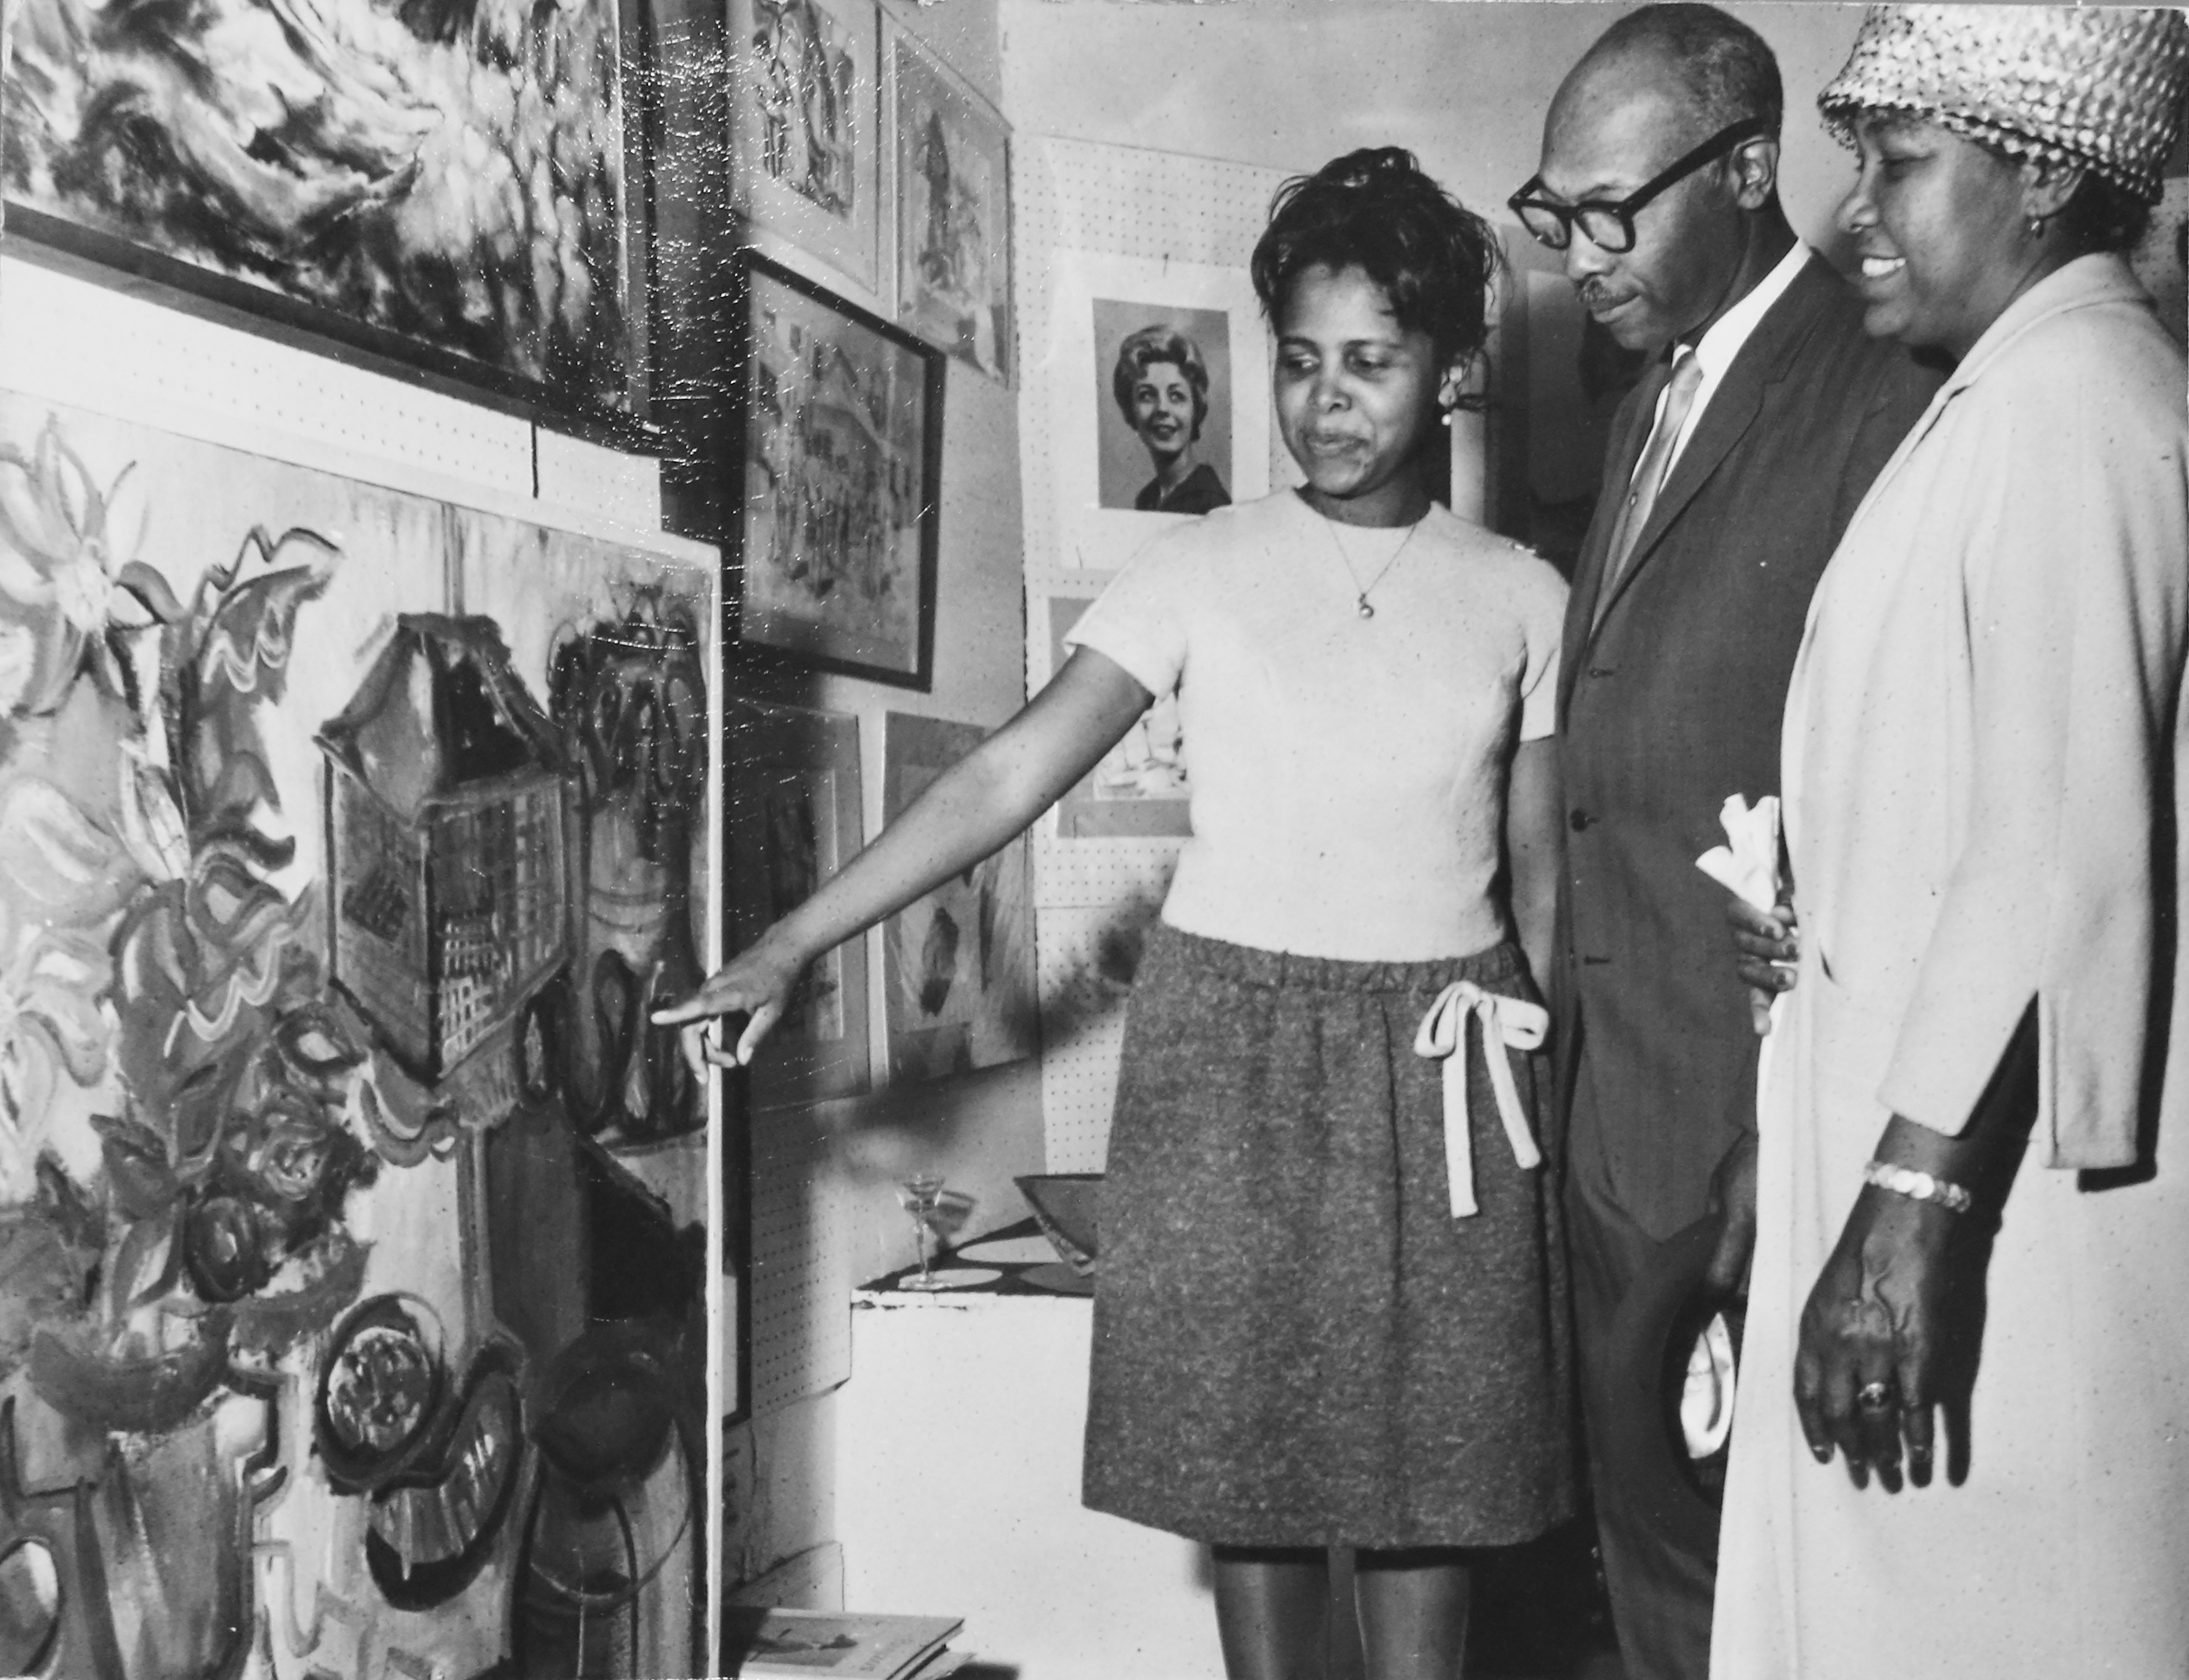 Shirley Woodson sharing her work with parents, Claude and Celia Woodson, at Detroit's Arts Extended Gallery in the early 1960s. Photo by James D. Wilson, courtesy Shirley Woodson.